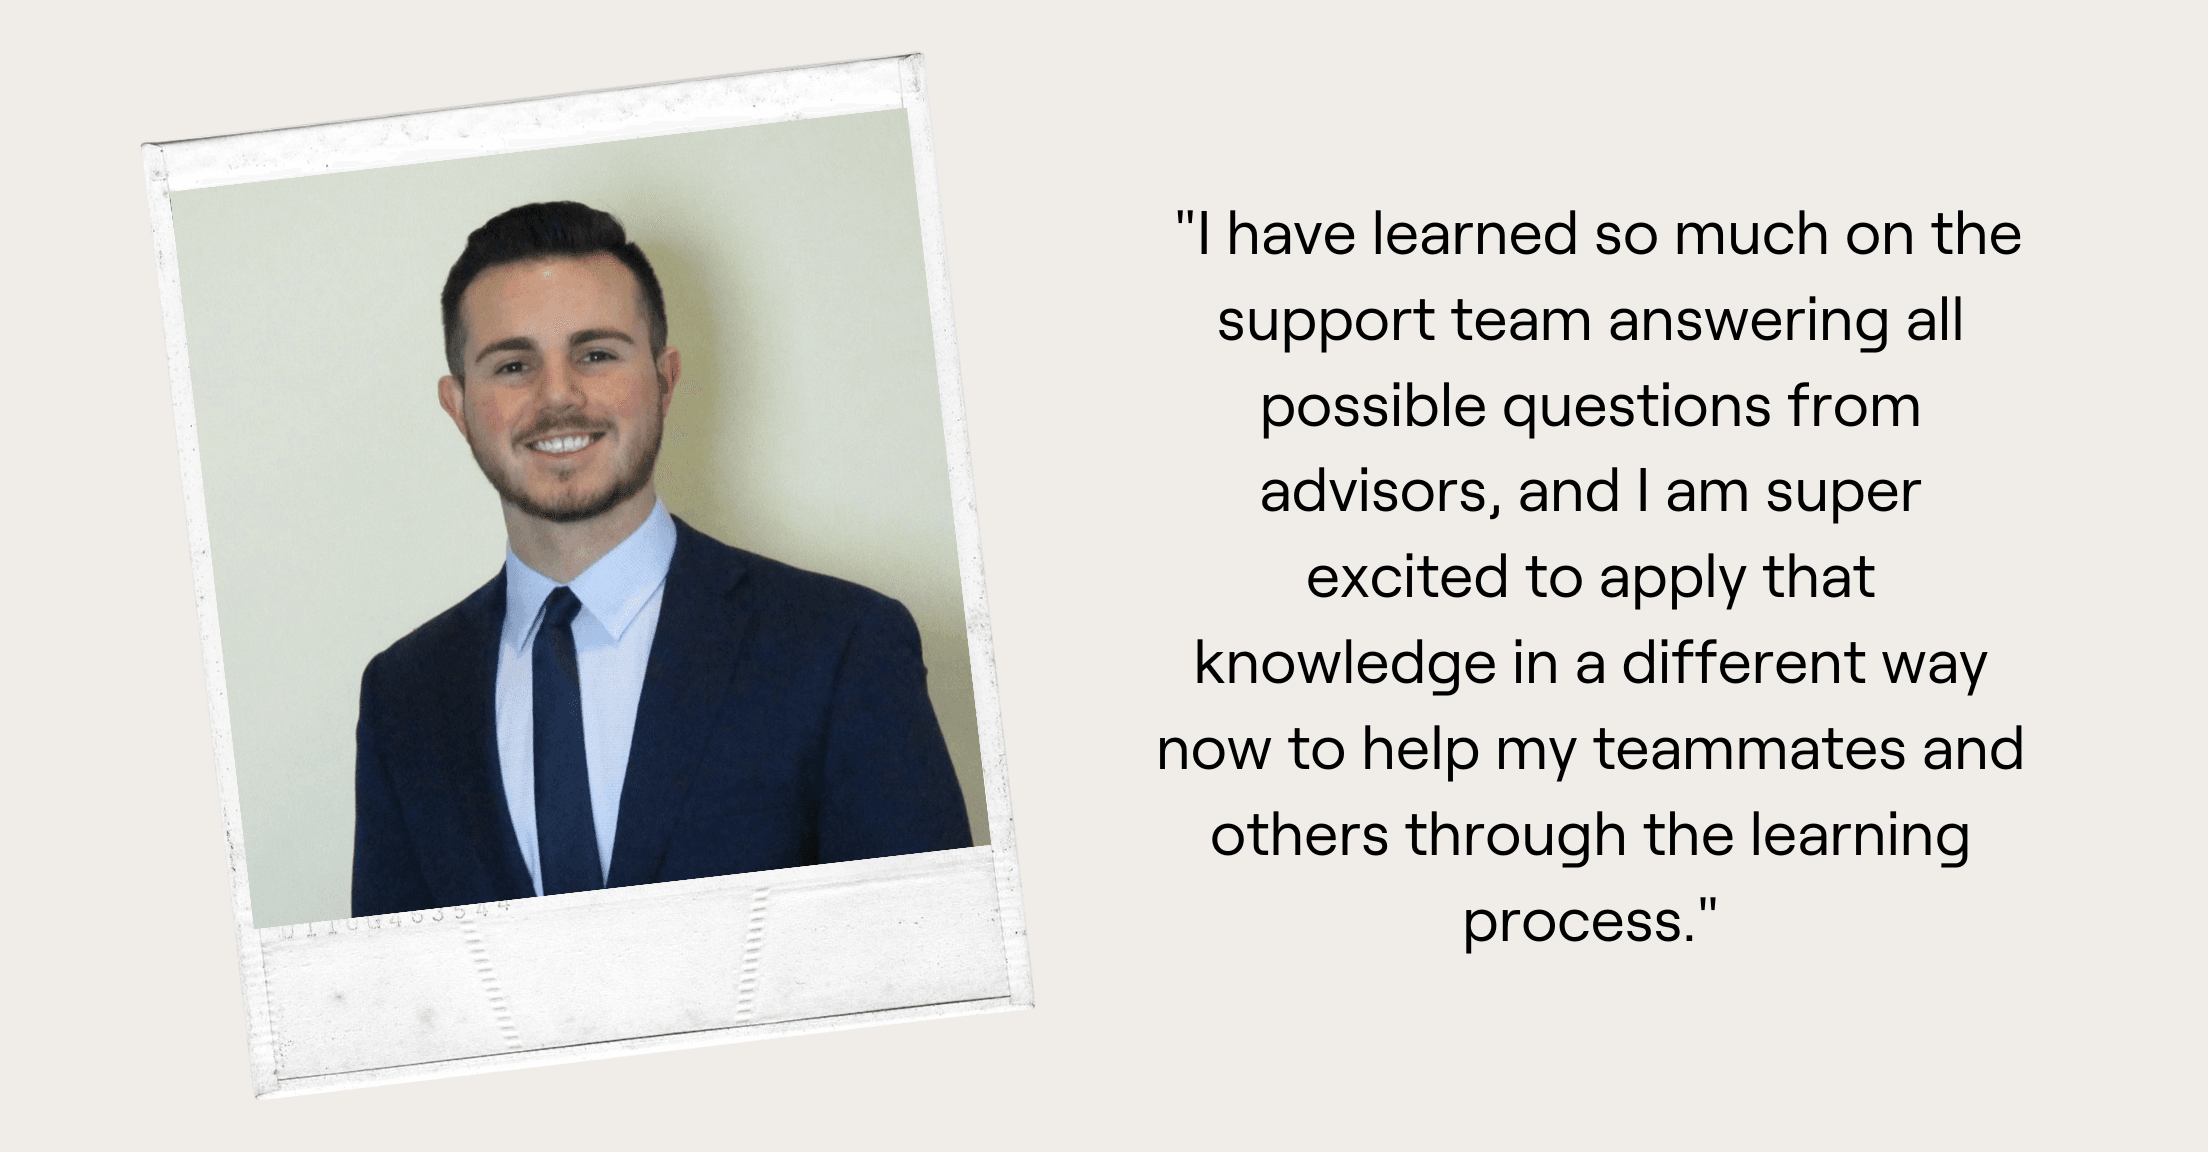 Justin, Training Associate, headshot and quote,  "I have learned so much on the support team answering all possible questions from advisors, and I am super excited to apply that knowledge in a different way now to help my teammates and others through the learning process."